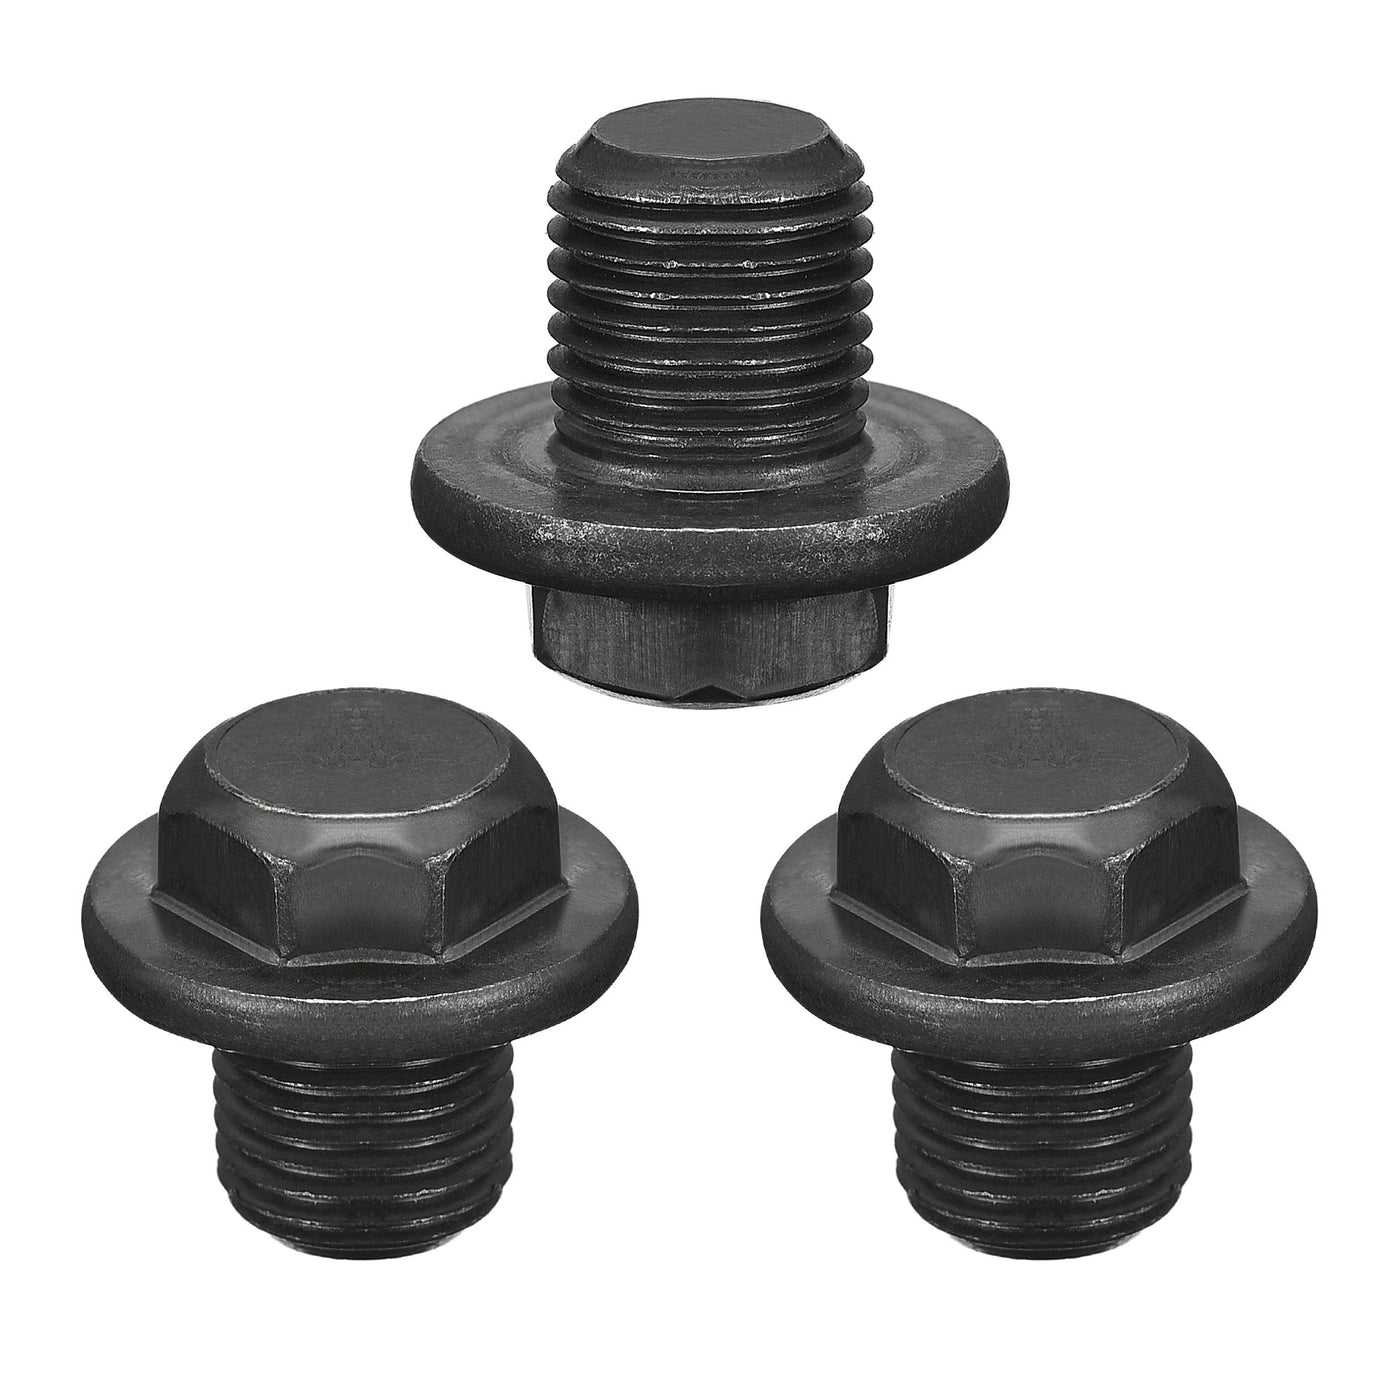 Uxcell Uxcell Outer Hex Head Socket Pipe Fitting Plug M12x1.25 Male Thread Carbon Steel 3Pcs for Terminate Pipe Ends